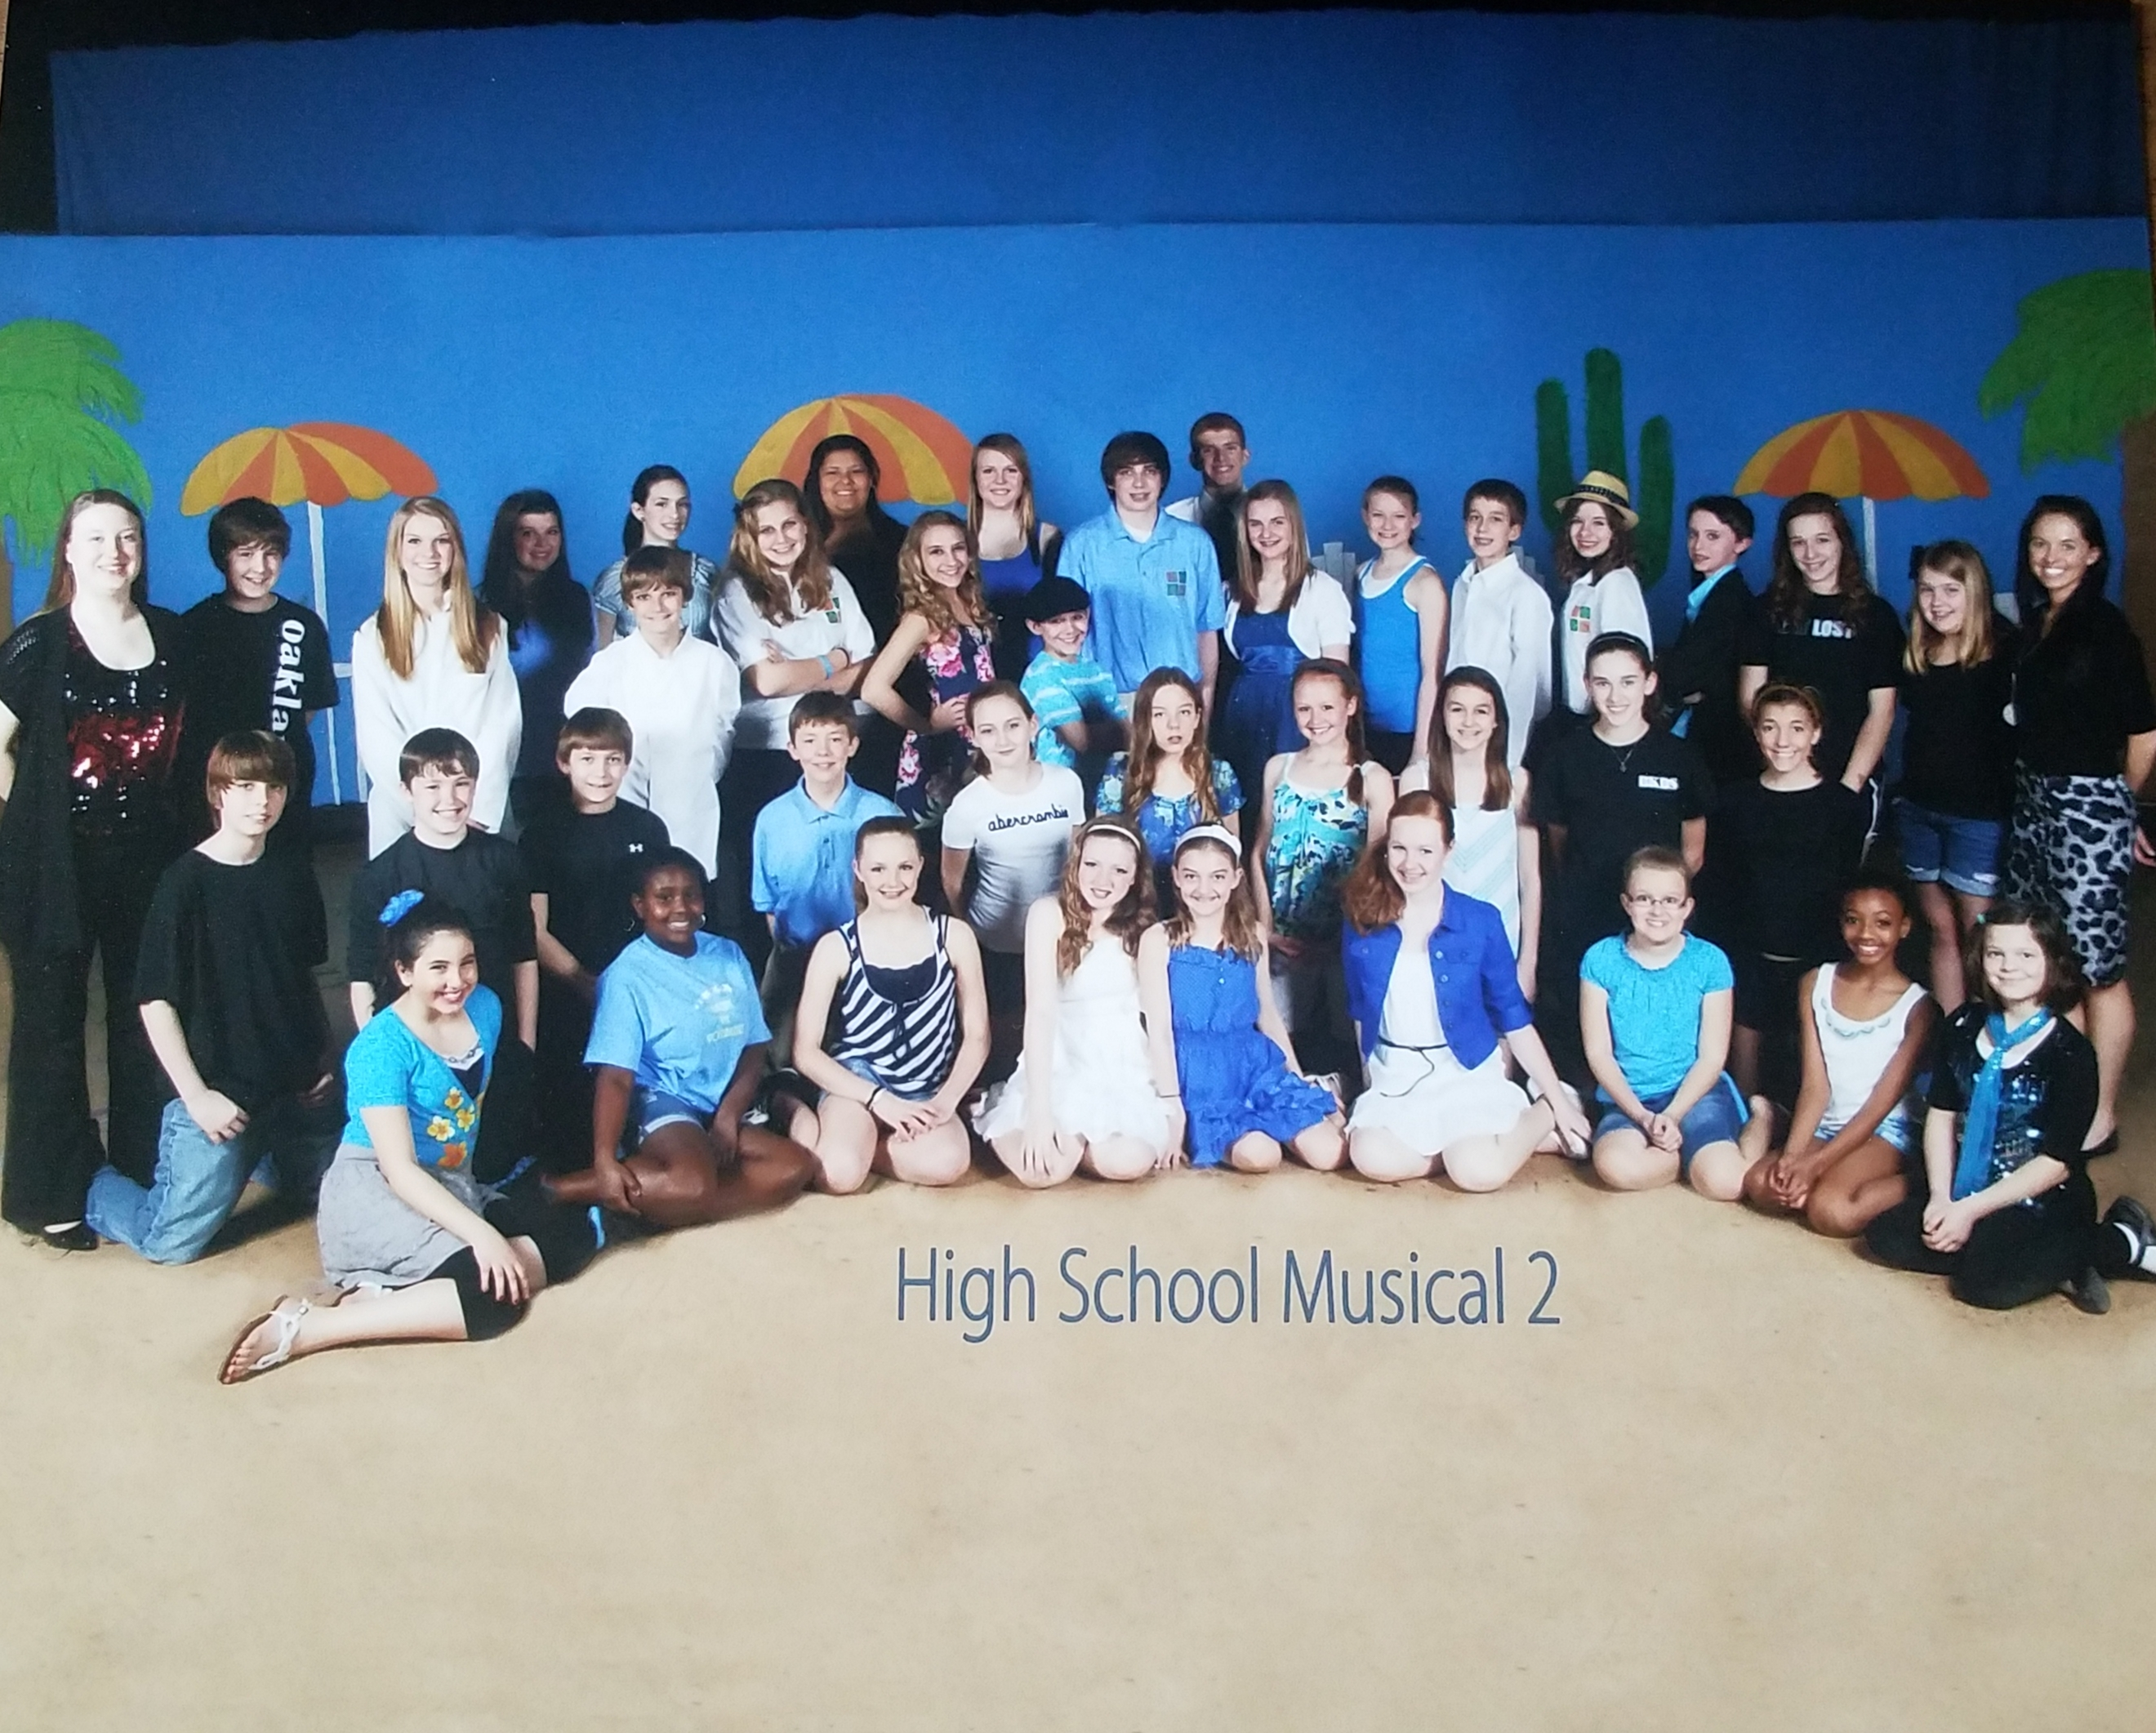 Cast and Crew of Disney's High School Musical 2